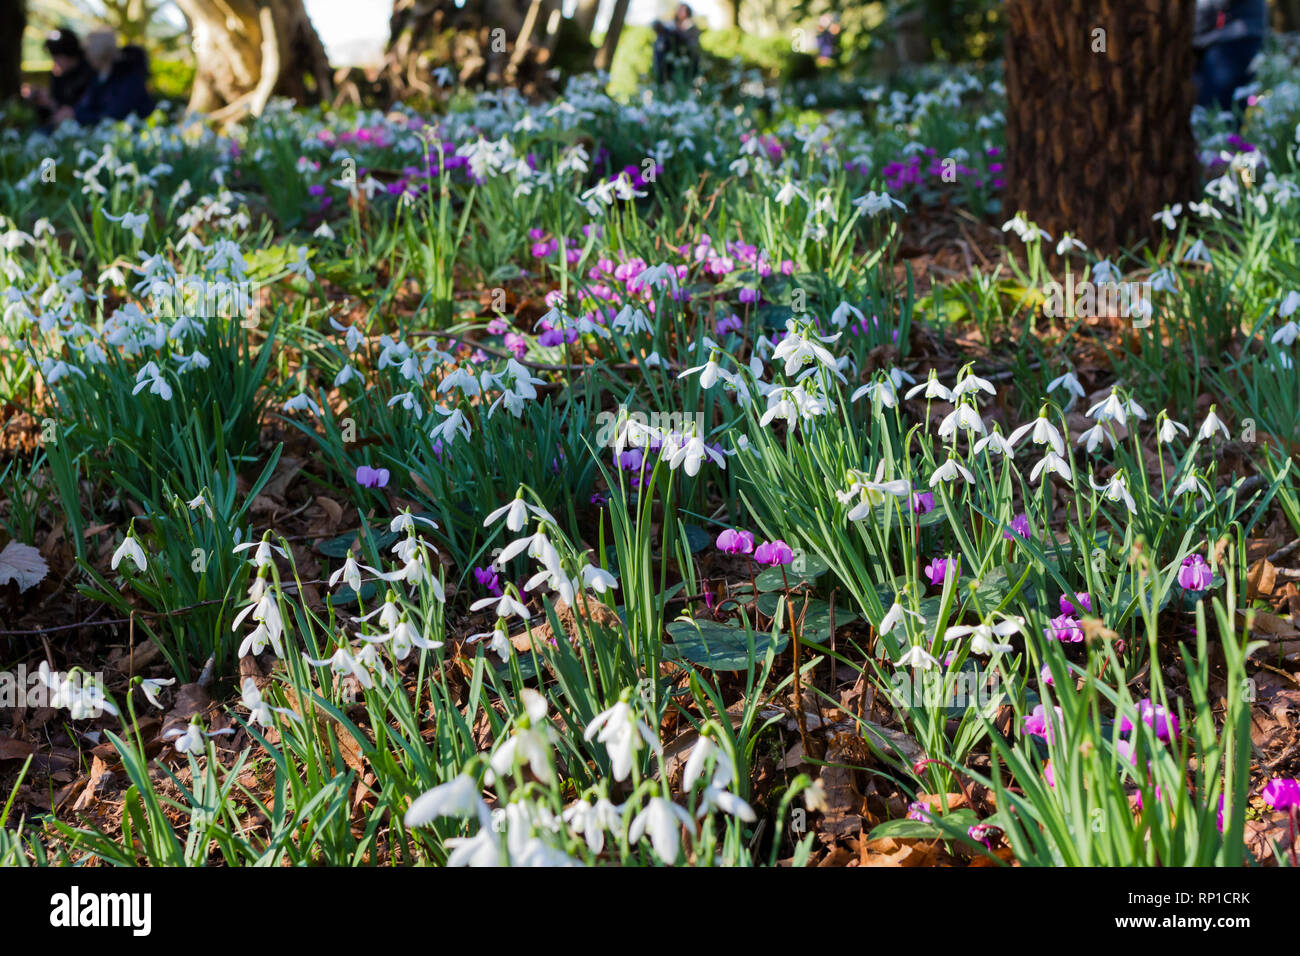 Snowdrops Galanthus nivalis and Cyclamen flowers in an English garden in late winter, Dorset, United Kingdom Stock Photo